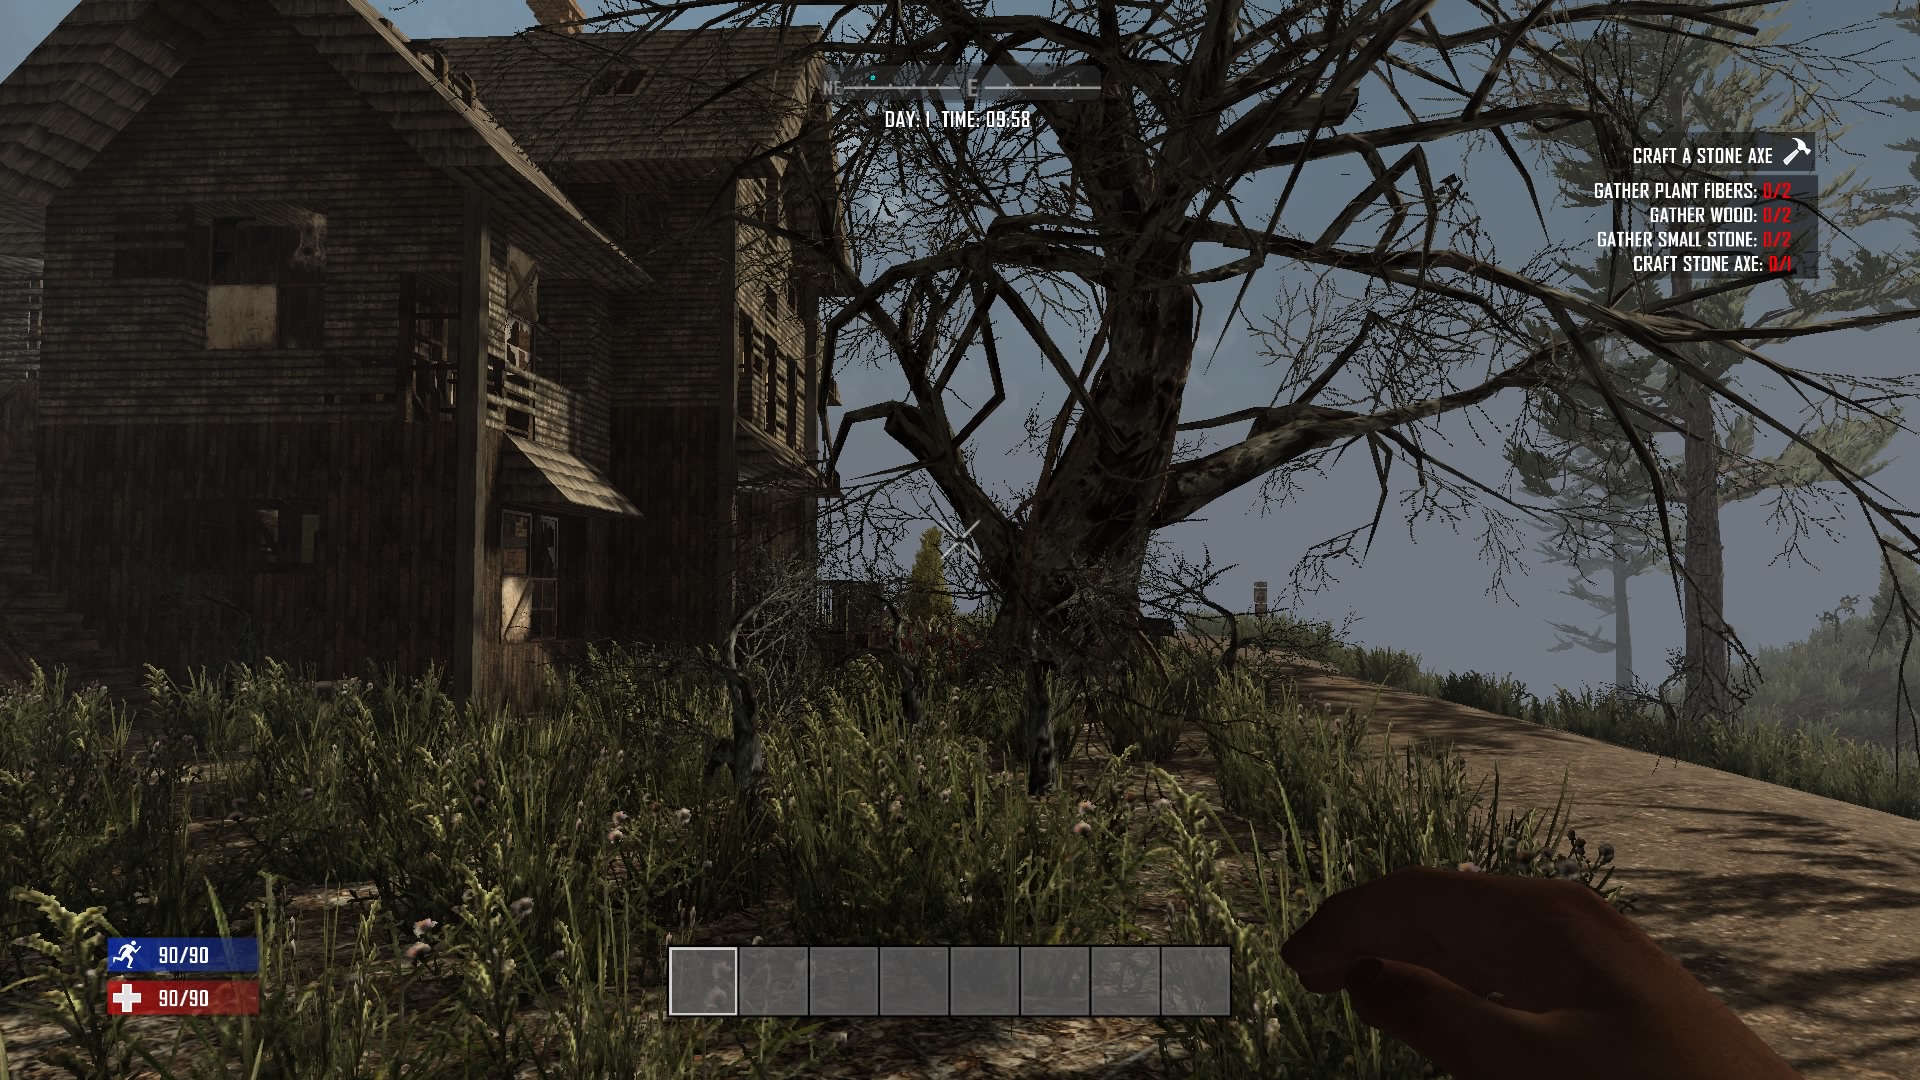 ps4 7 days to die